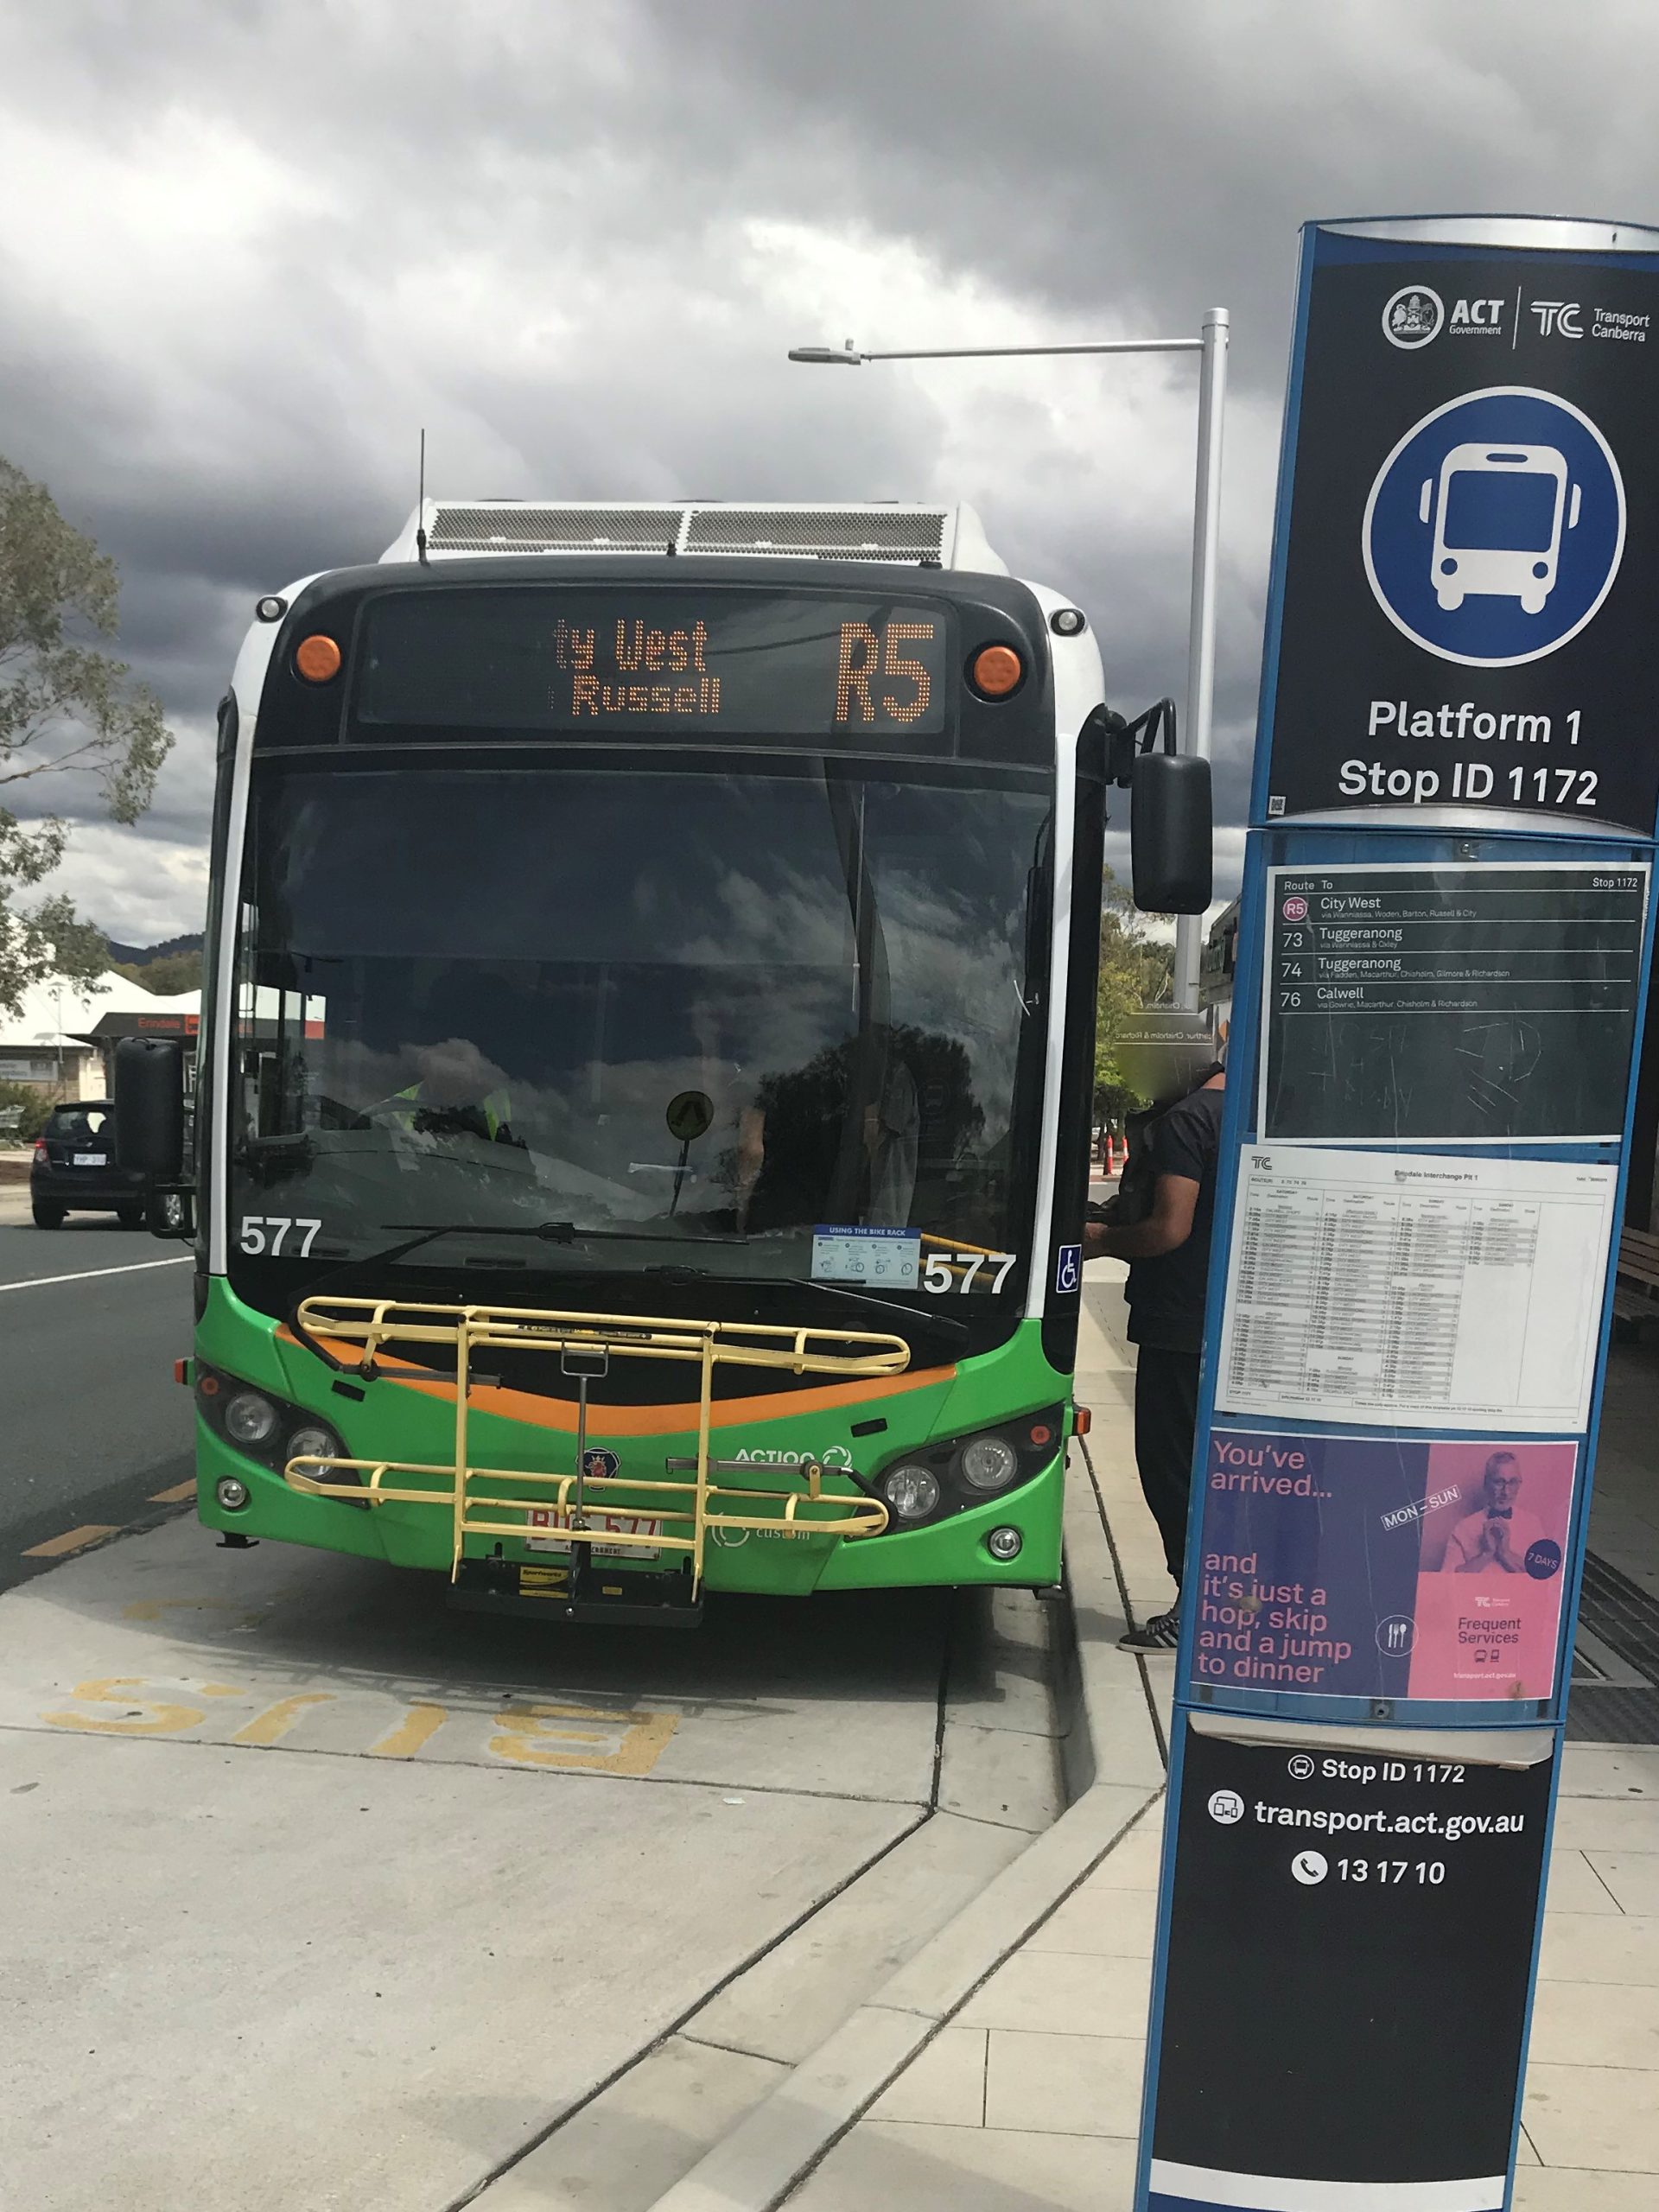 Revised Bus Timetable starting April 2020